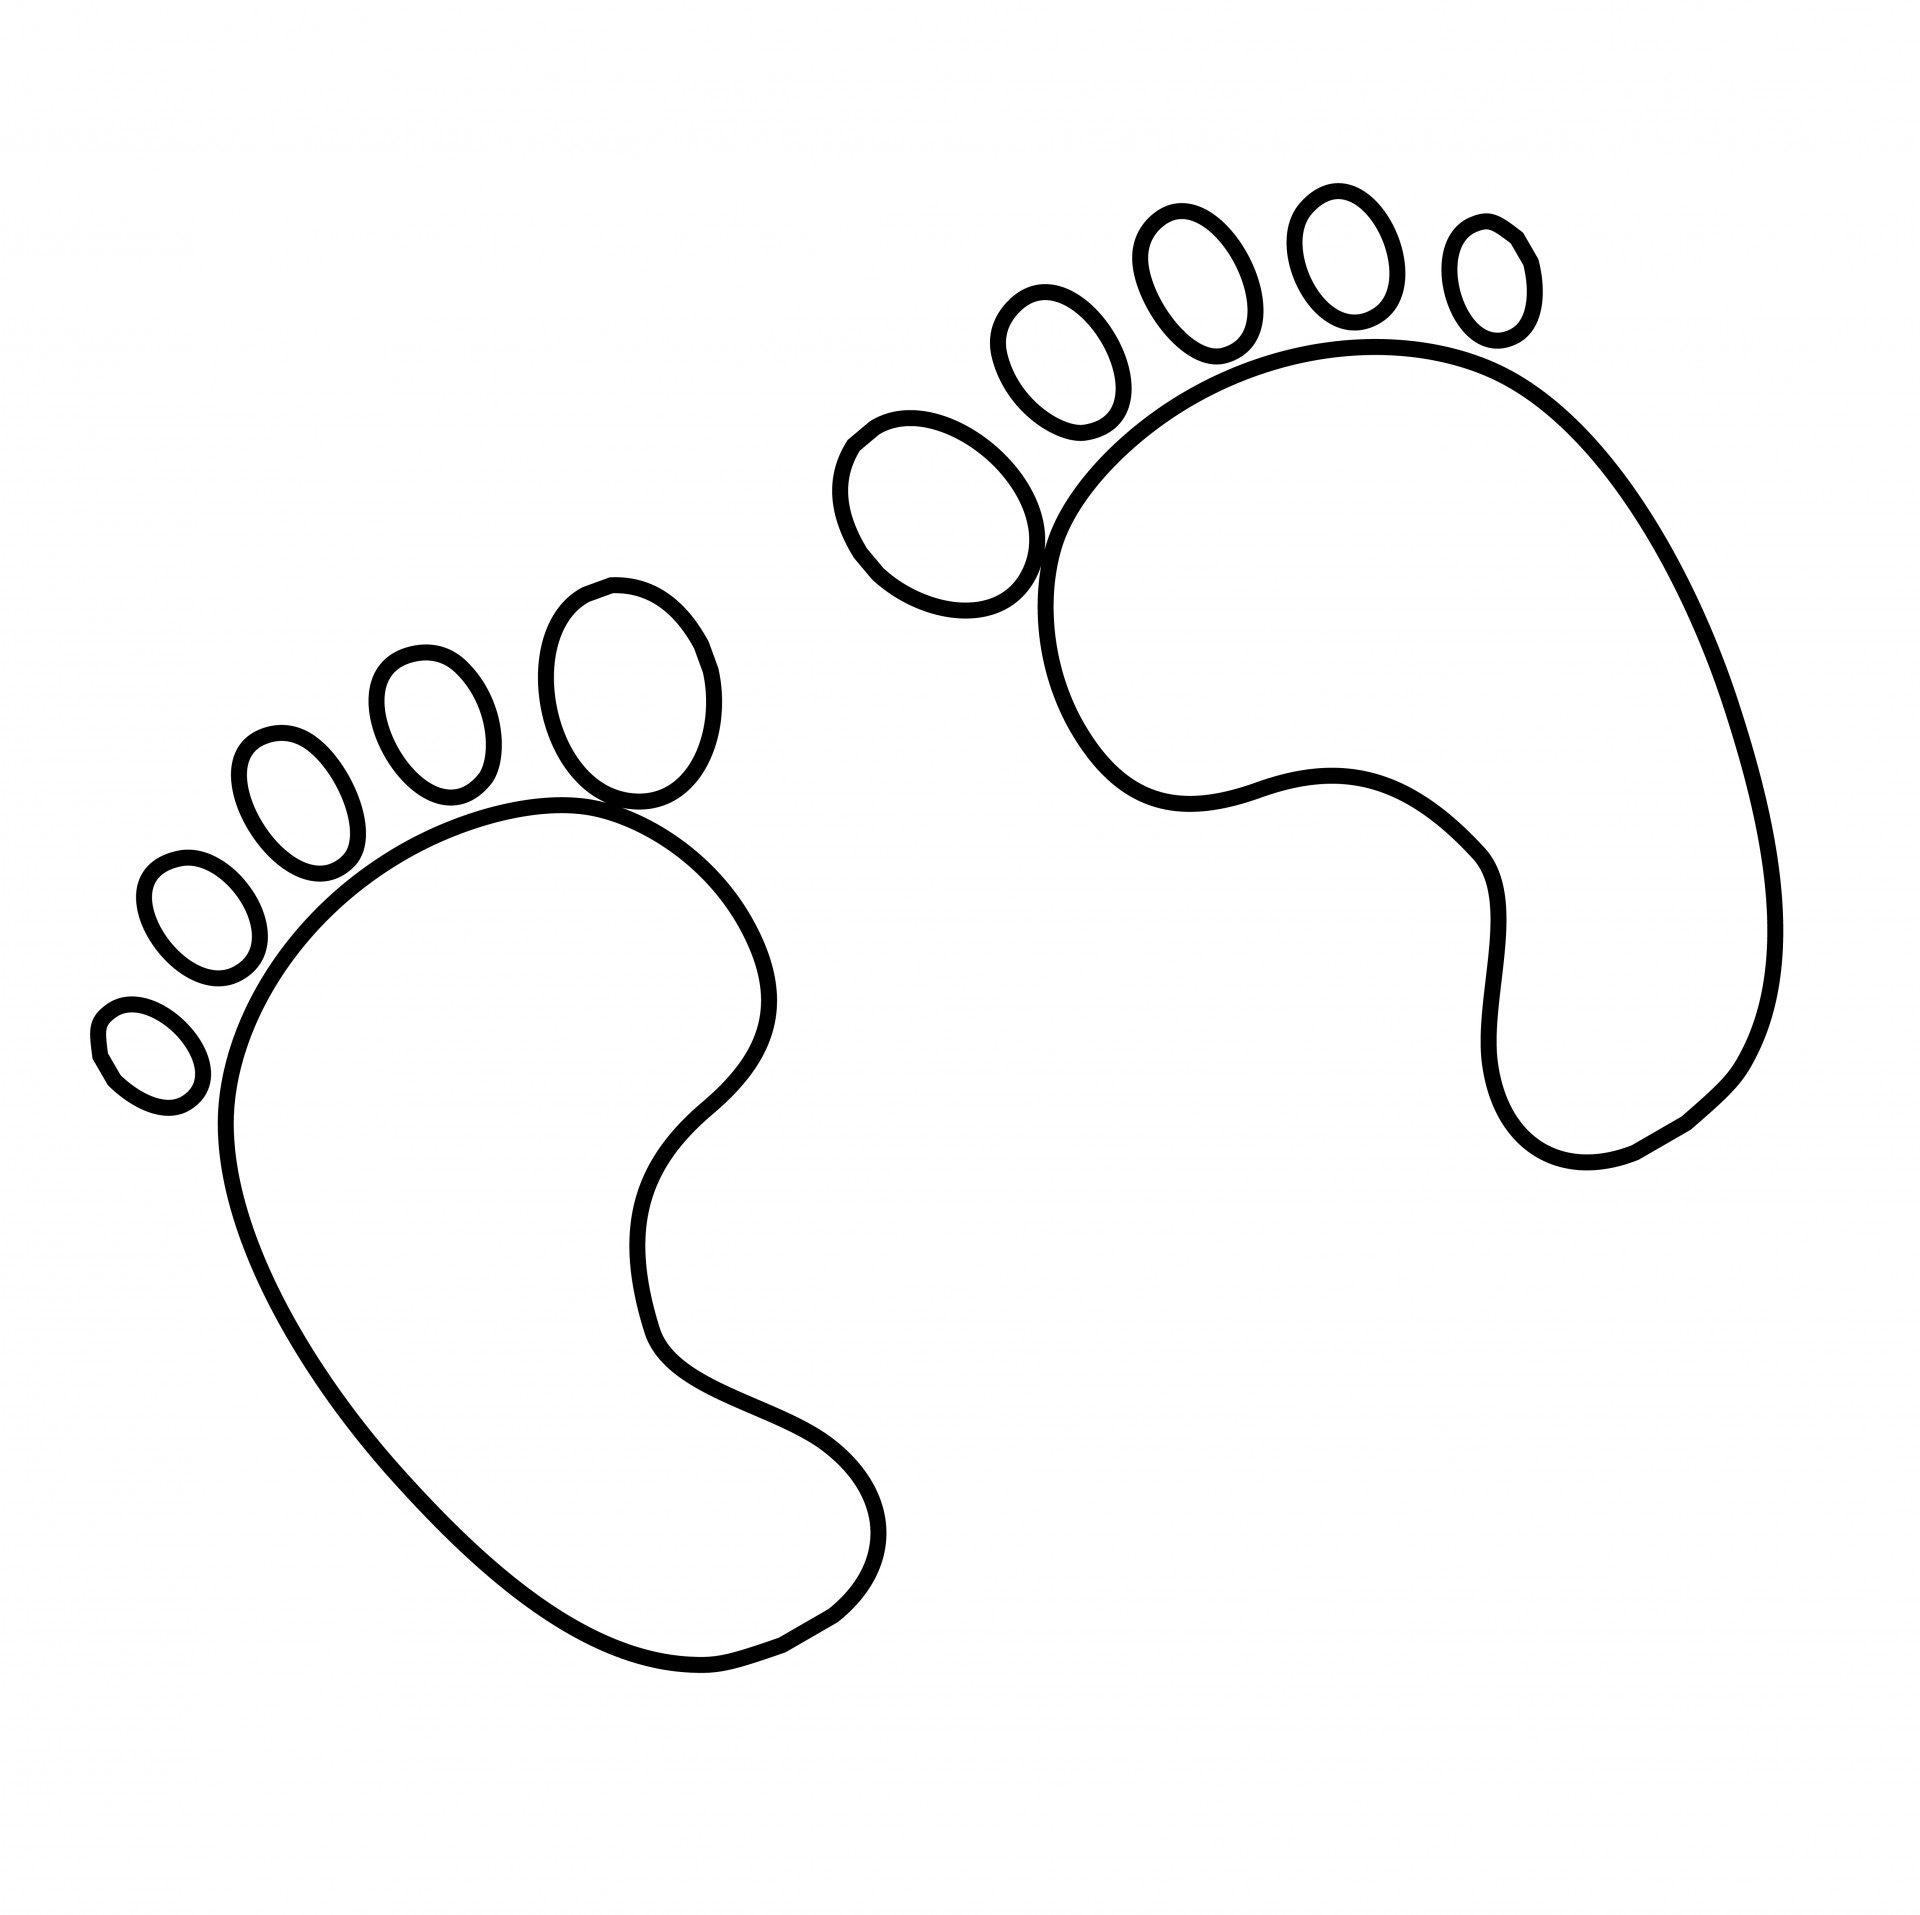 Footprints outline free stock. Footsteps clipart